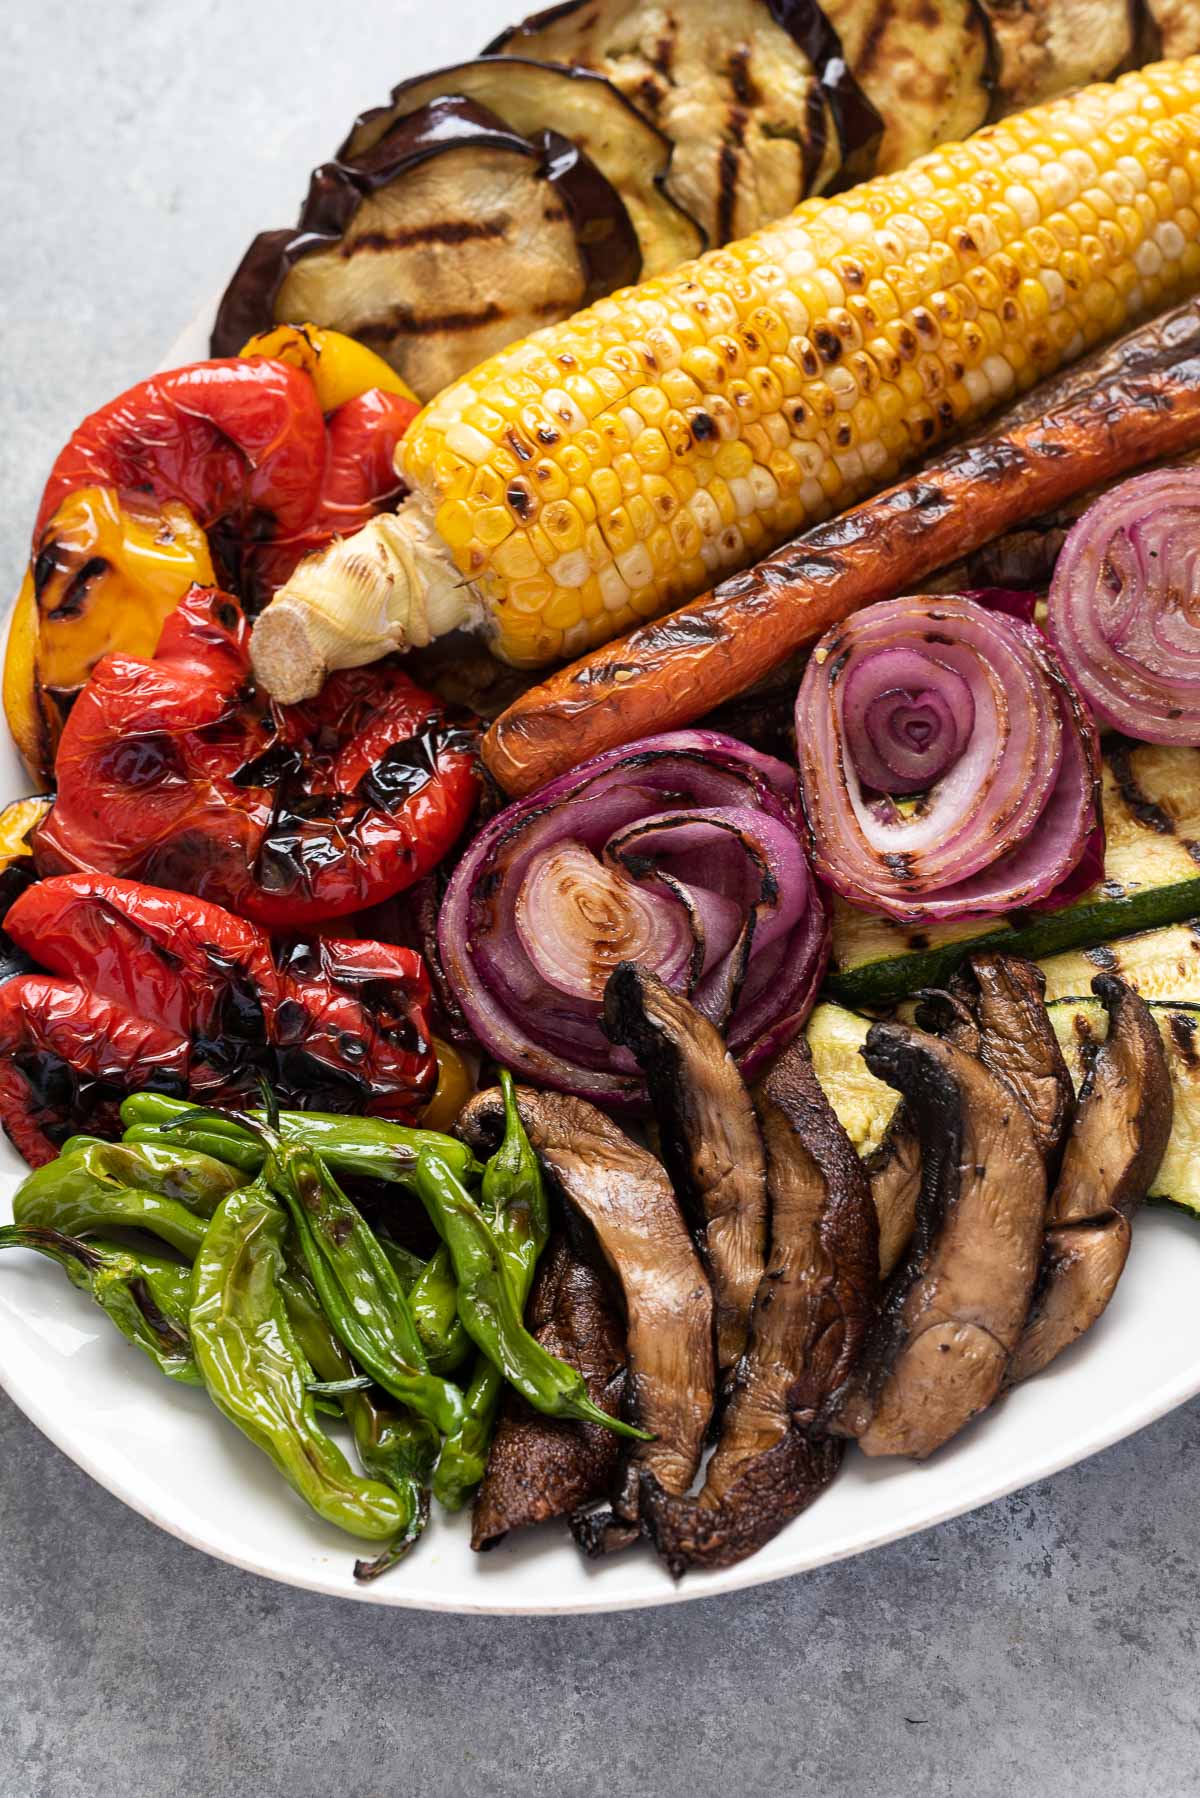 Platter filled with an array of grilled vegetables